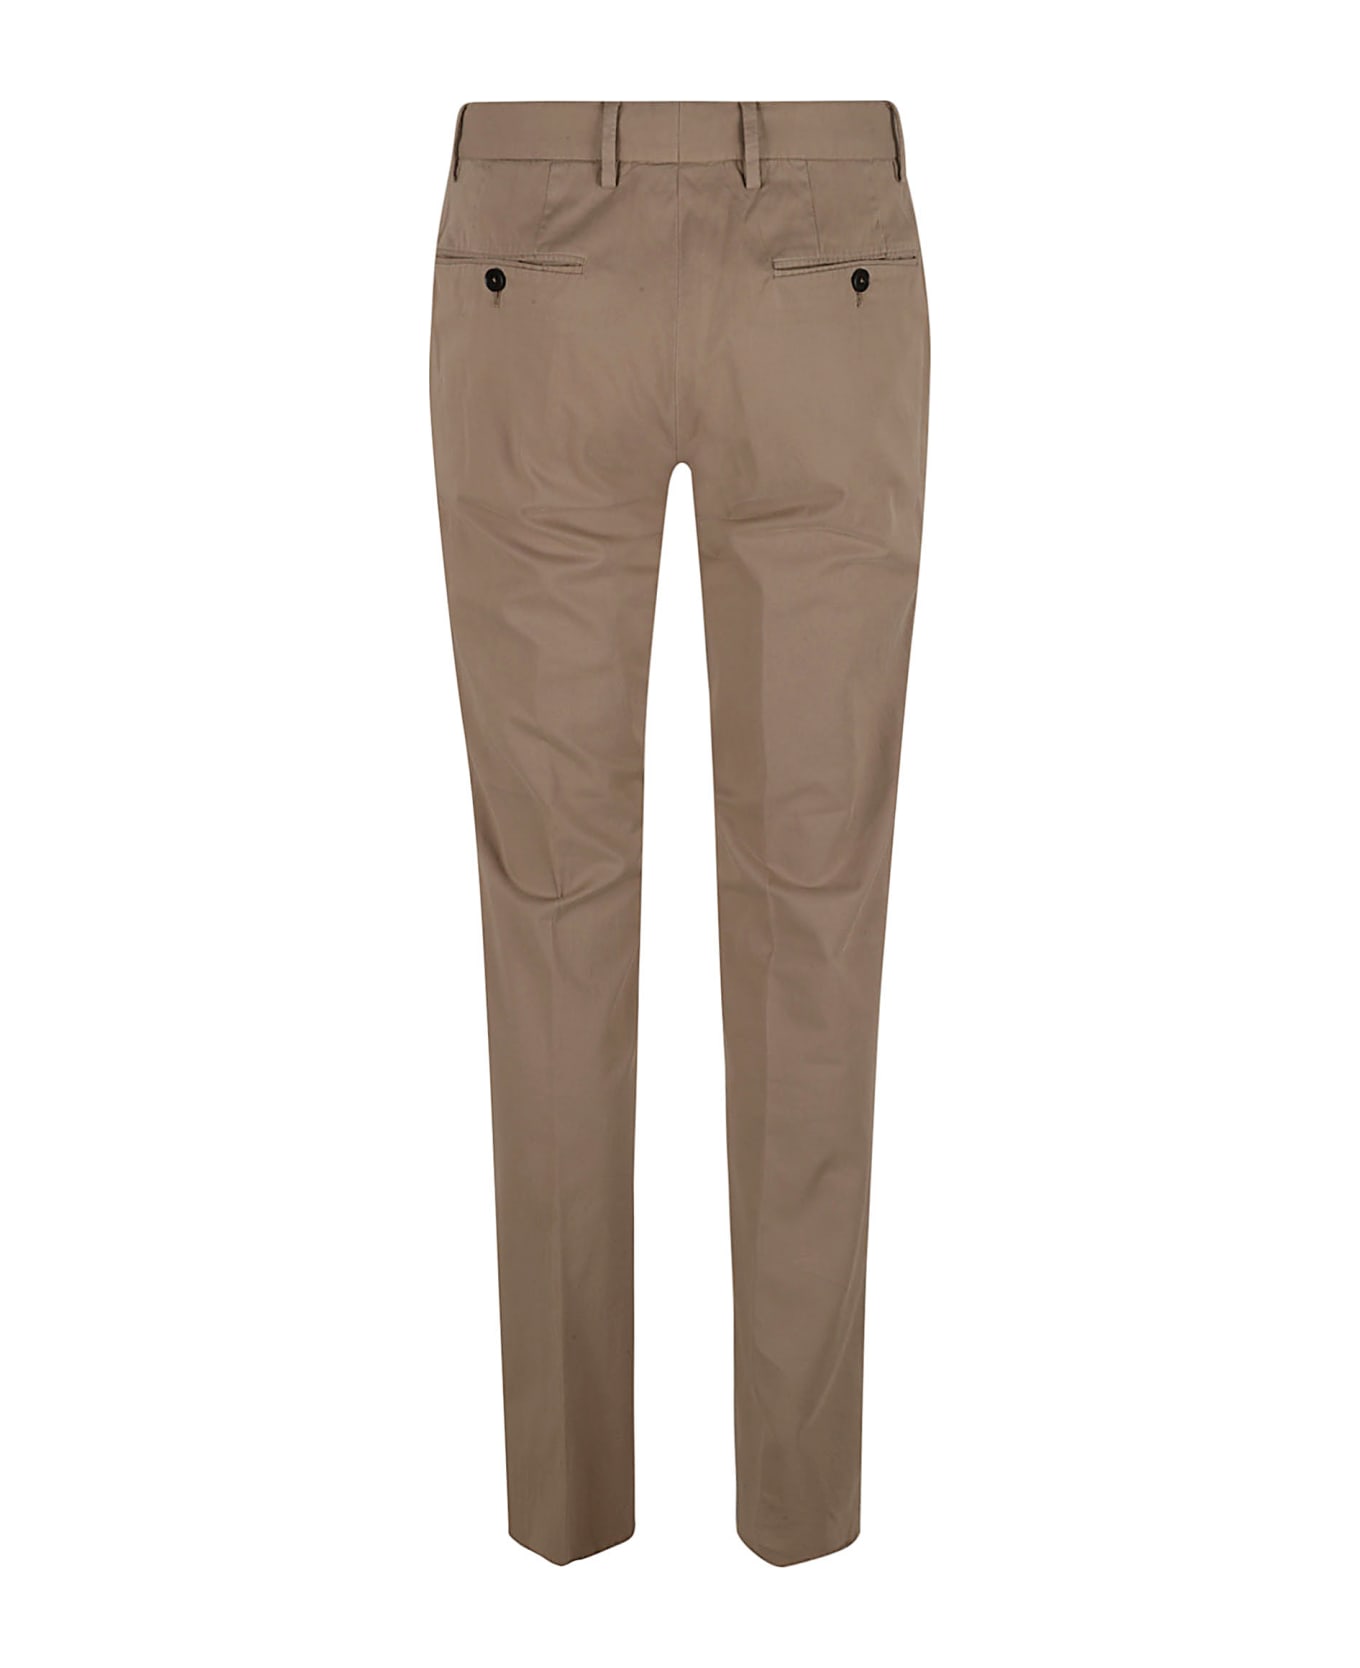 Zegna Concealed Trousers - GREY